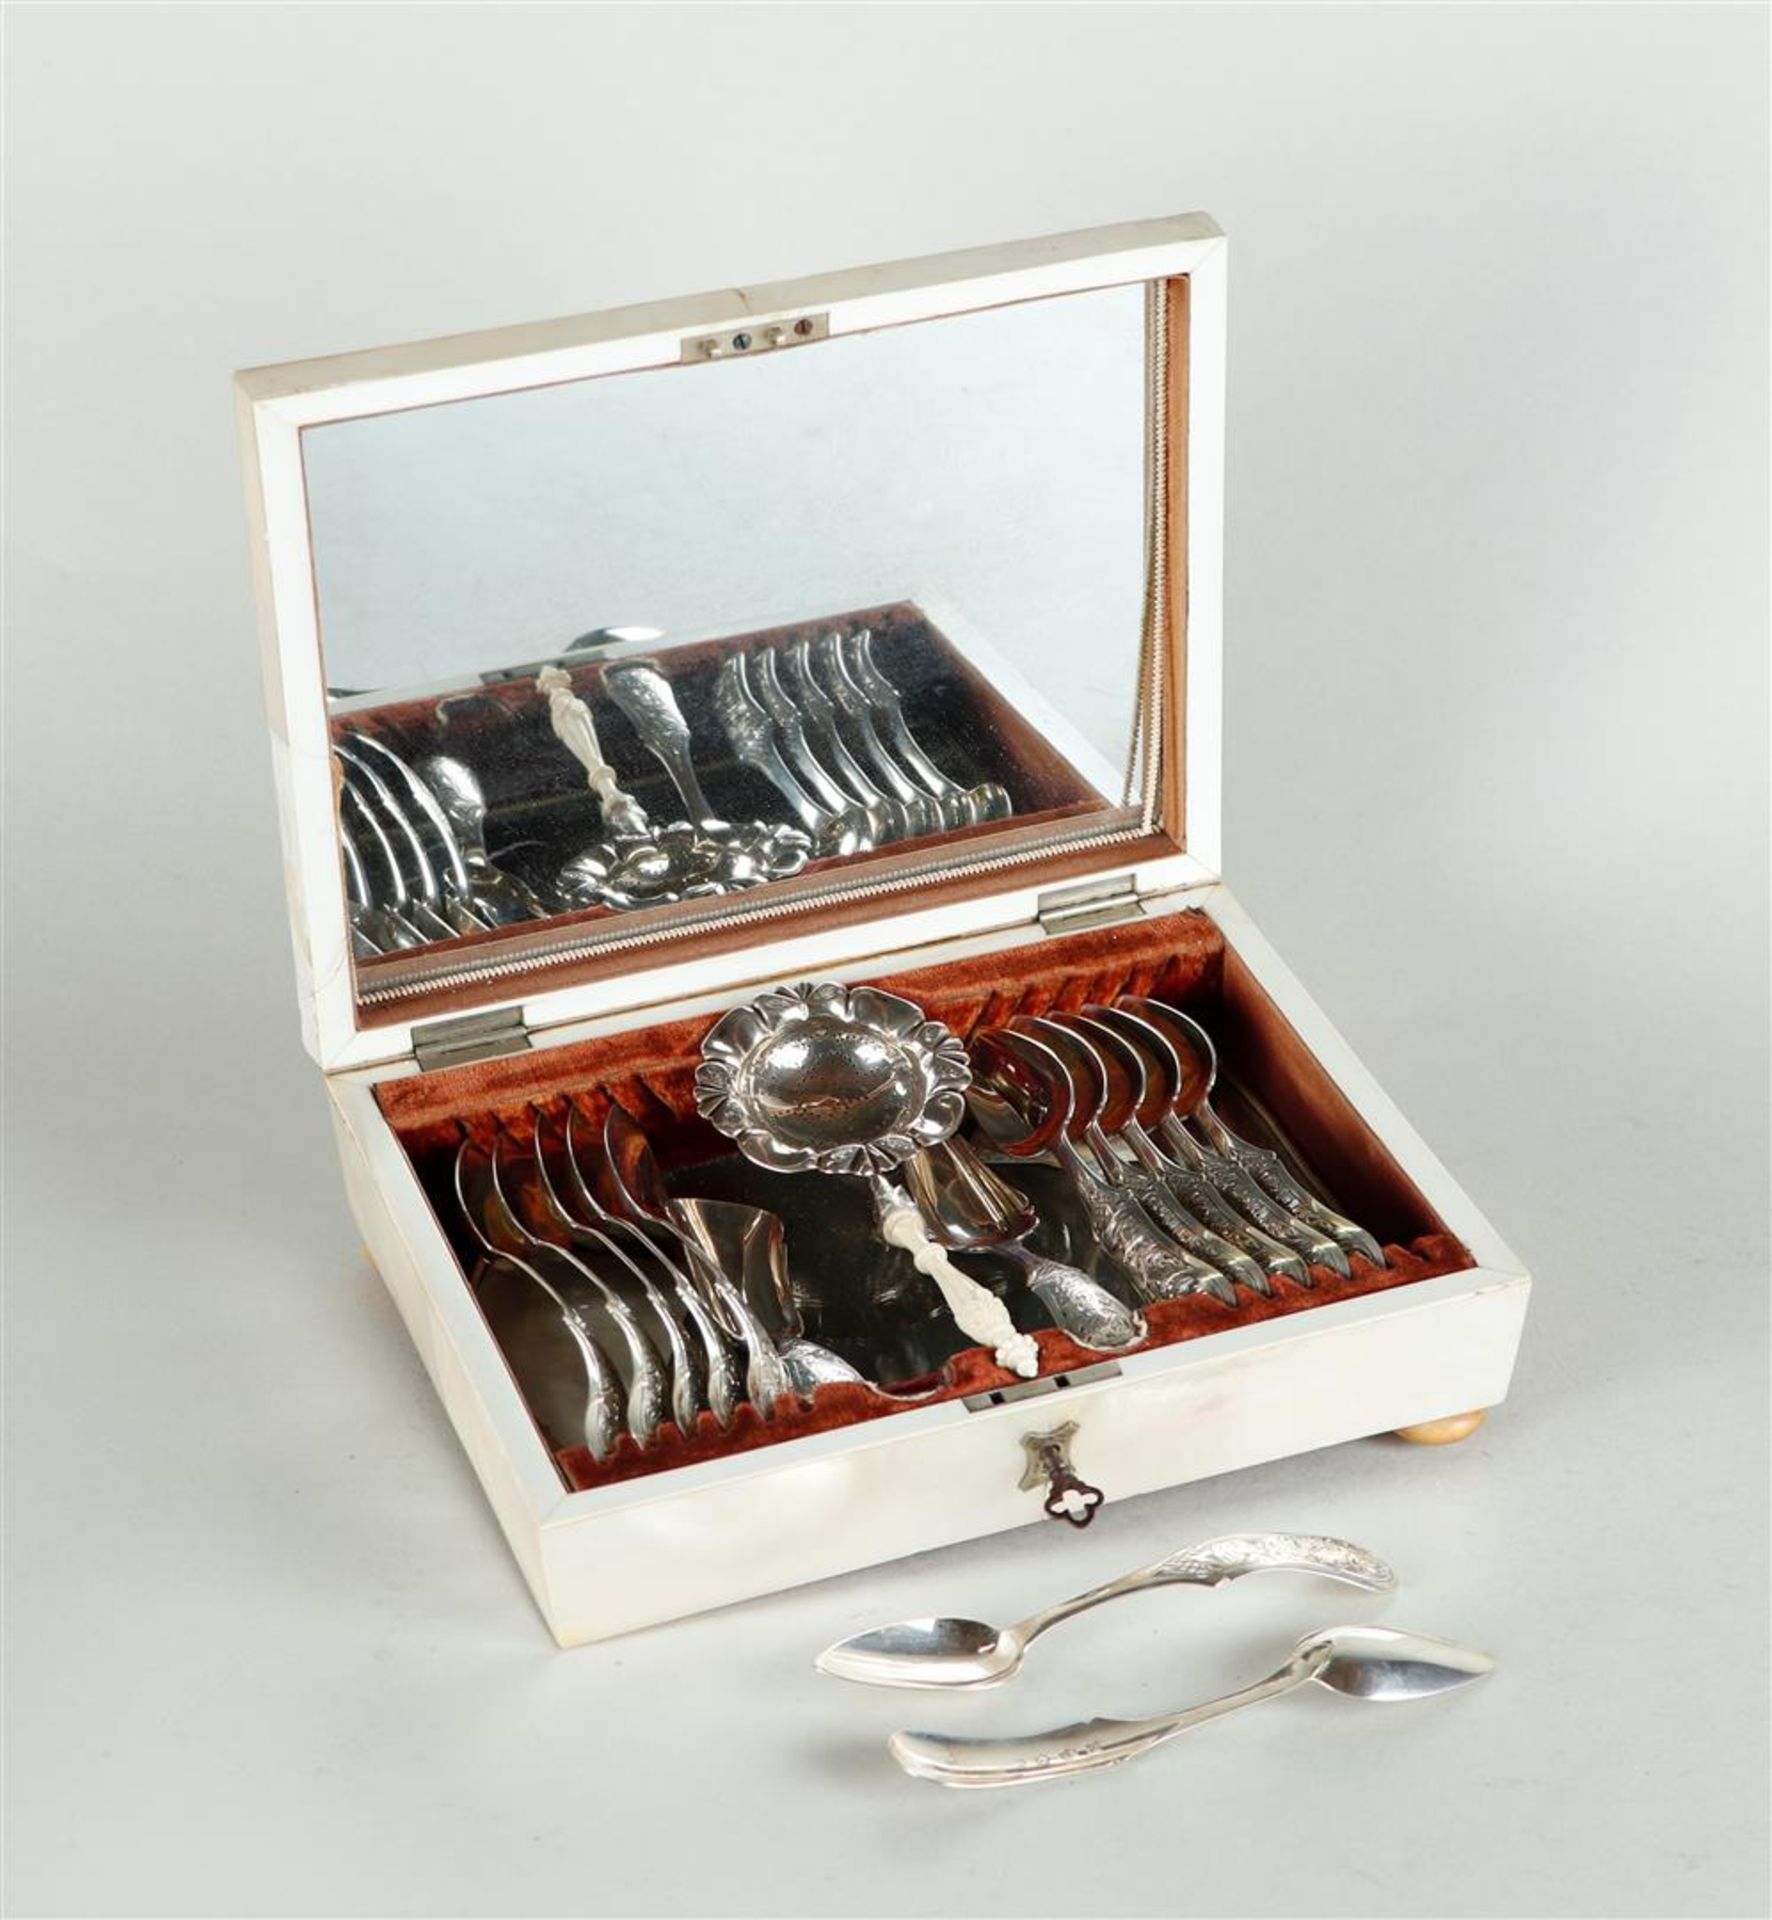 Mother of pearl box with silver spoons, forks and tea strainer. - Image 3 of 4